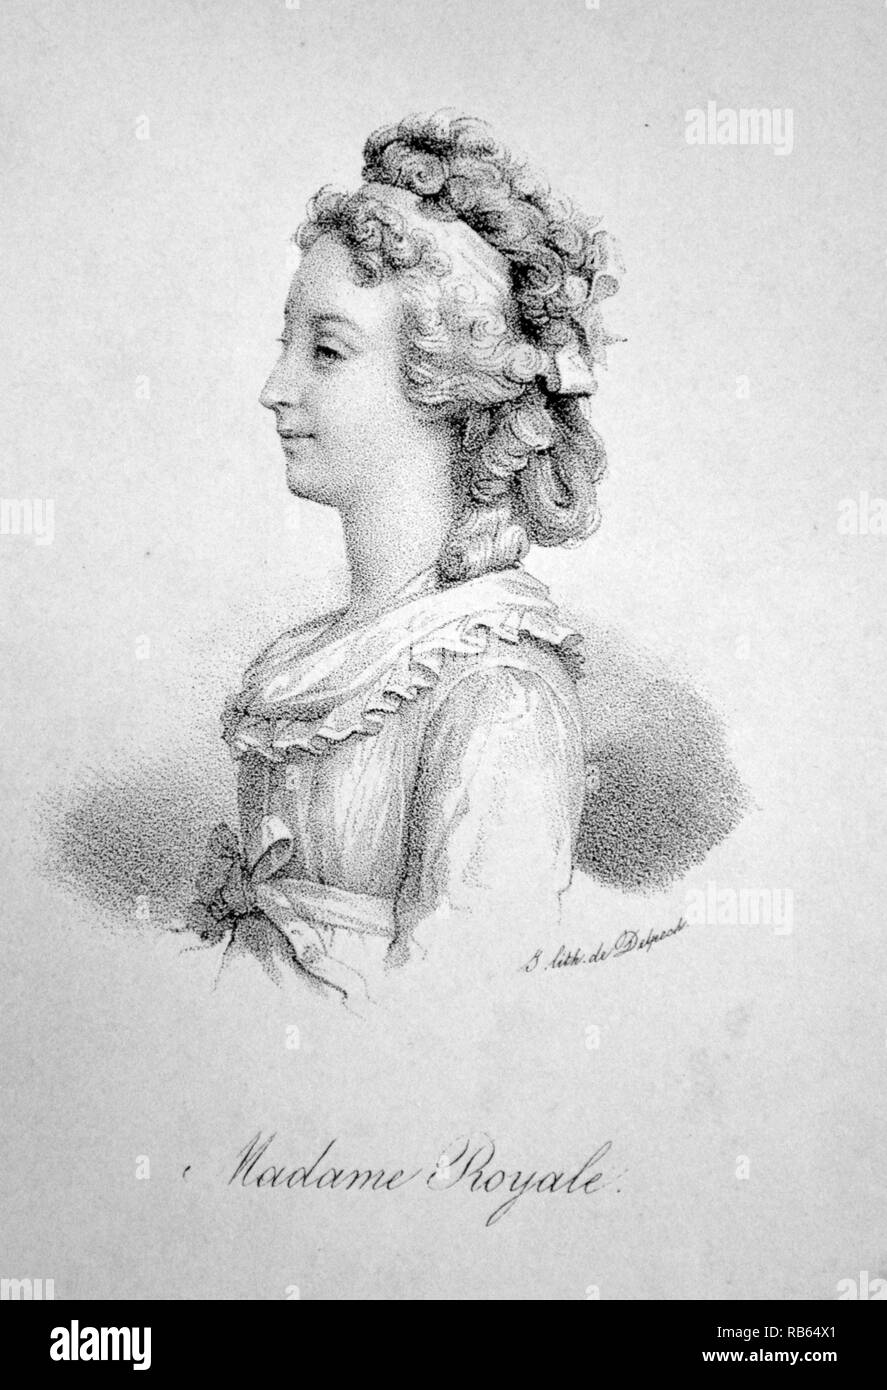 Madame Royale: Marie Therese Charlotte, Duchess of Angouleme (1778-1851) edest child of Louis XVI of France. Lithograph, Paris, c1840. Stock Photo